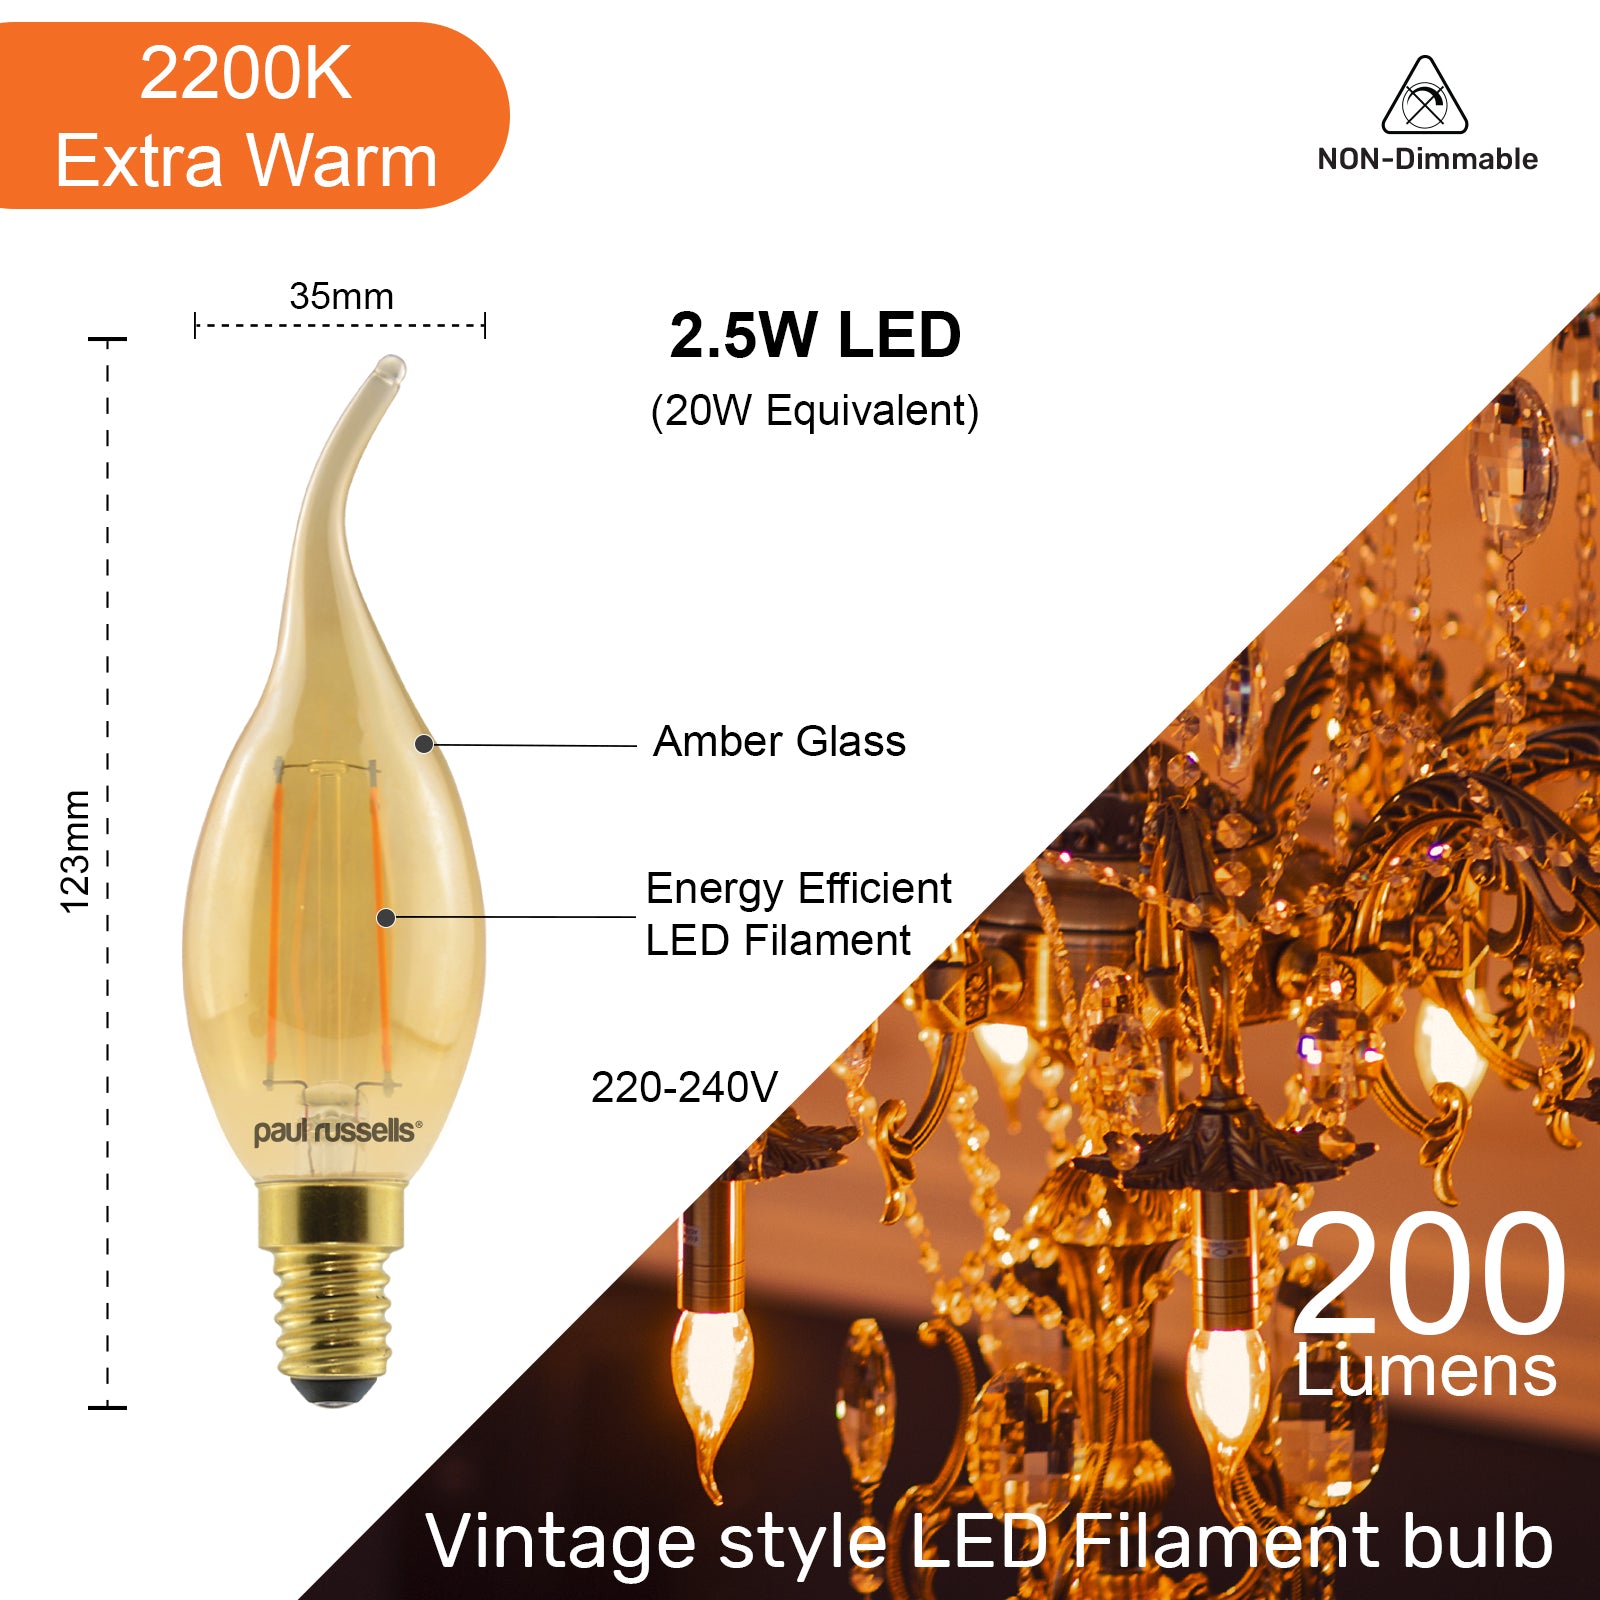 LED Filament Bent Tip Candle 2.5W=20W Extra Warm White (2200K) SES E14 Small Edison Screw Bulbs